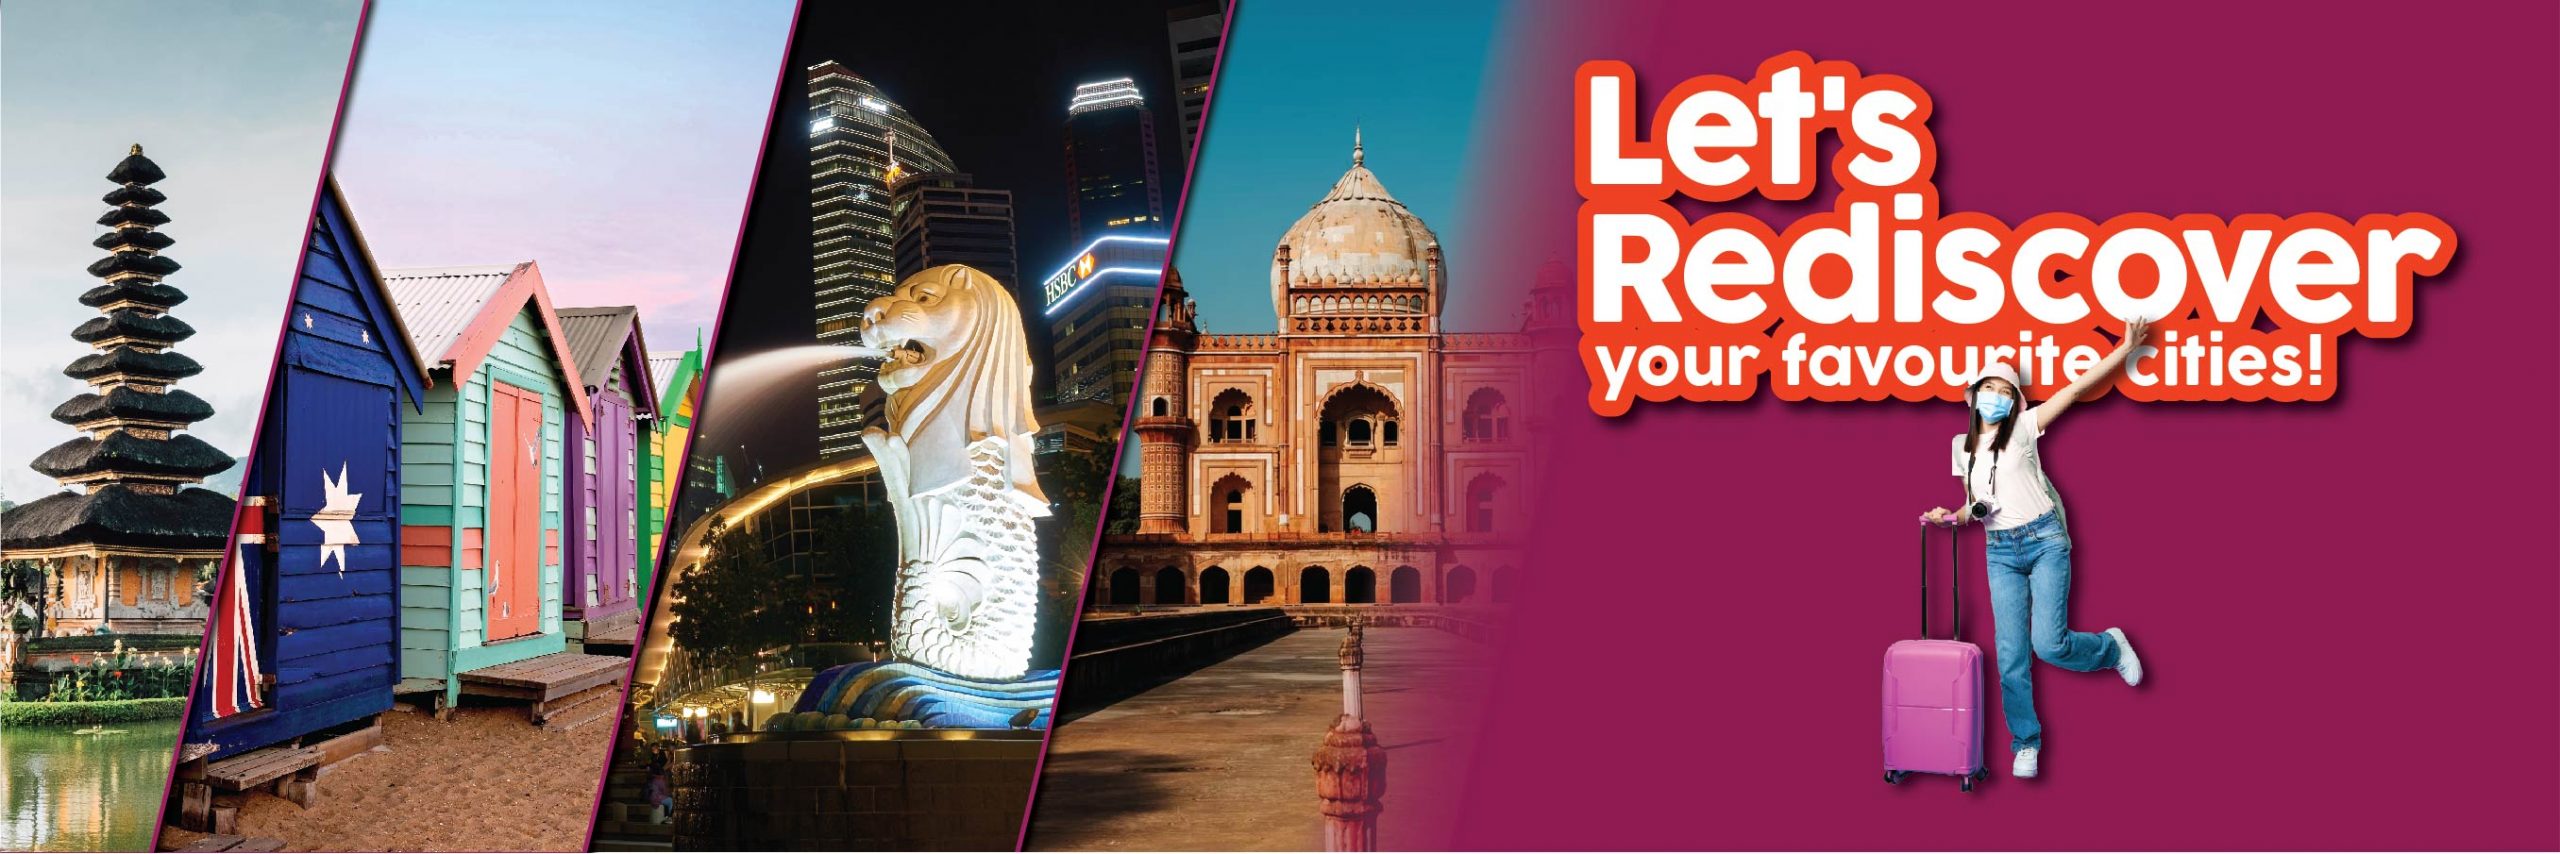 Batik Air - Lets Rediscover Your Favourite Cities od lets rediscover scaled